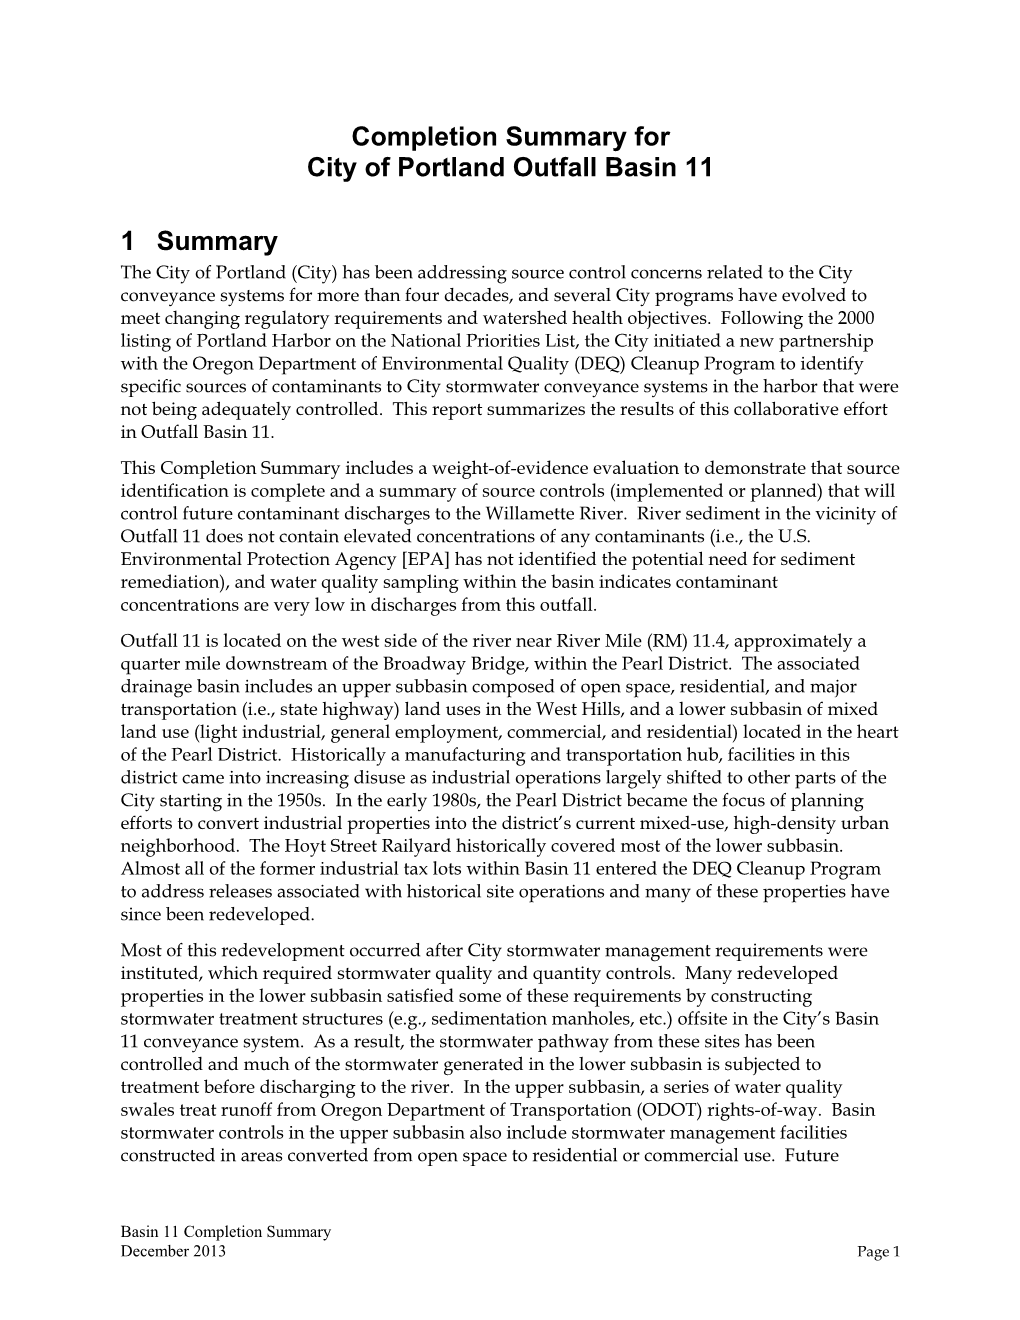 Completion Summary for City of Portland Outfall Basin 11